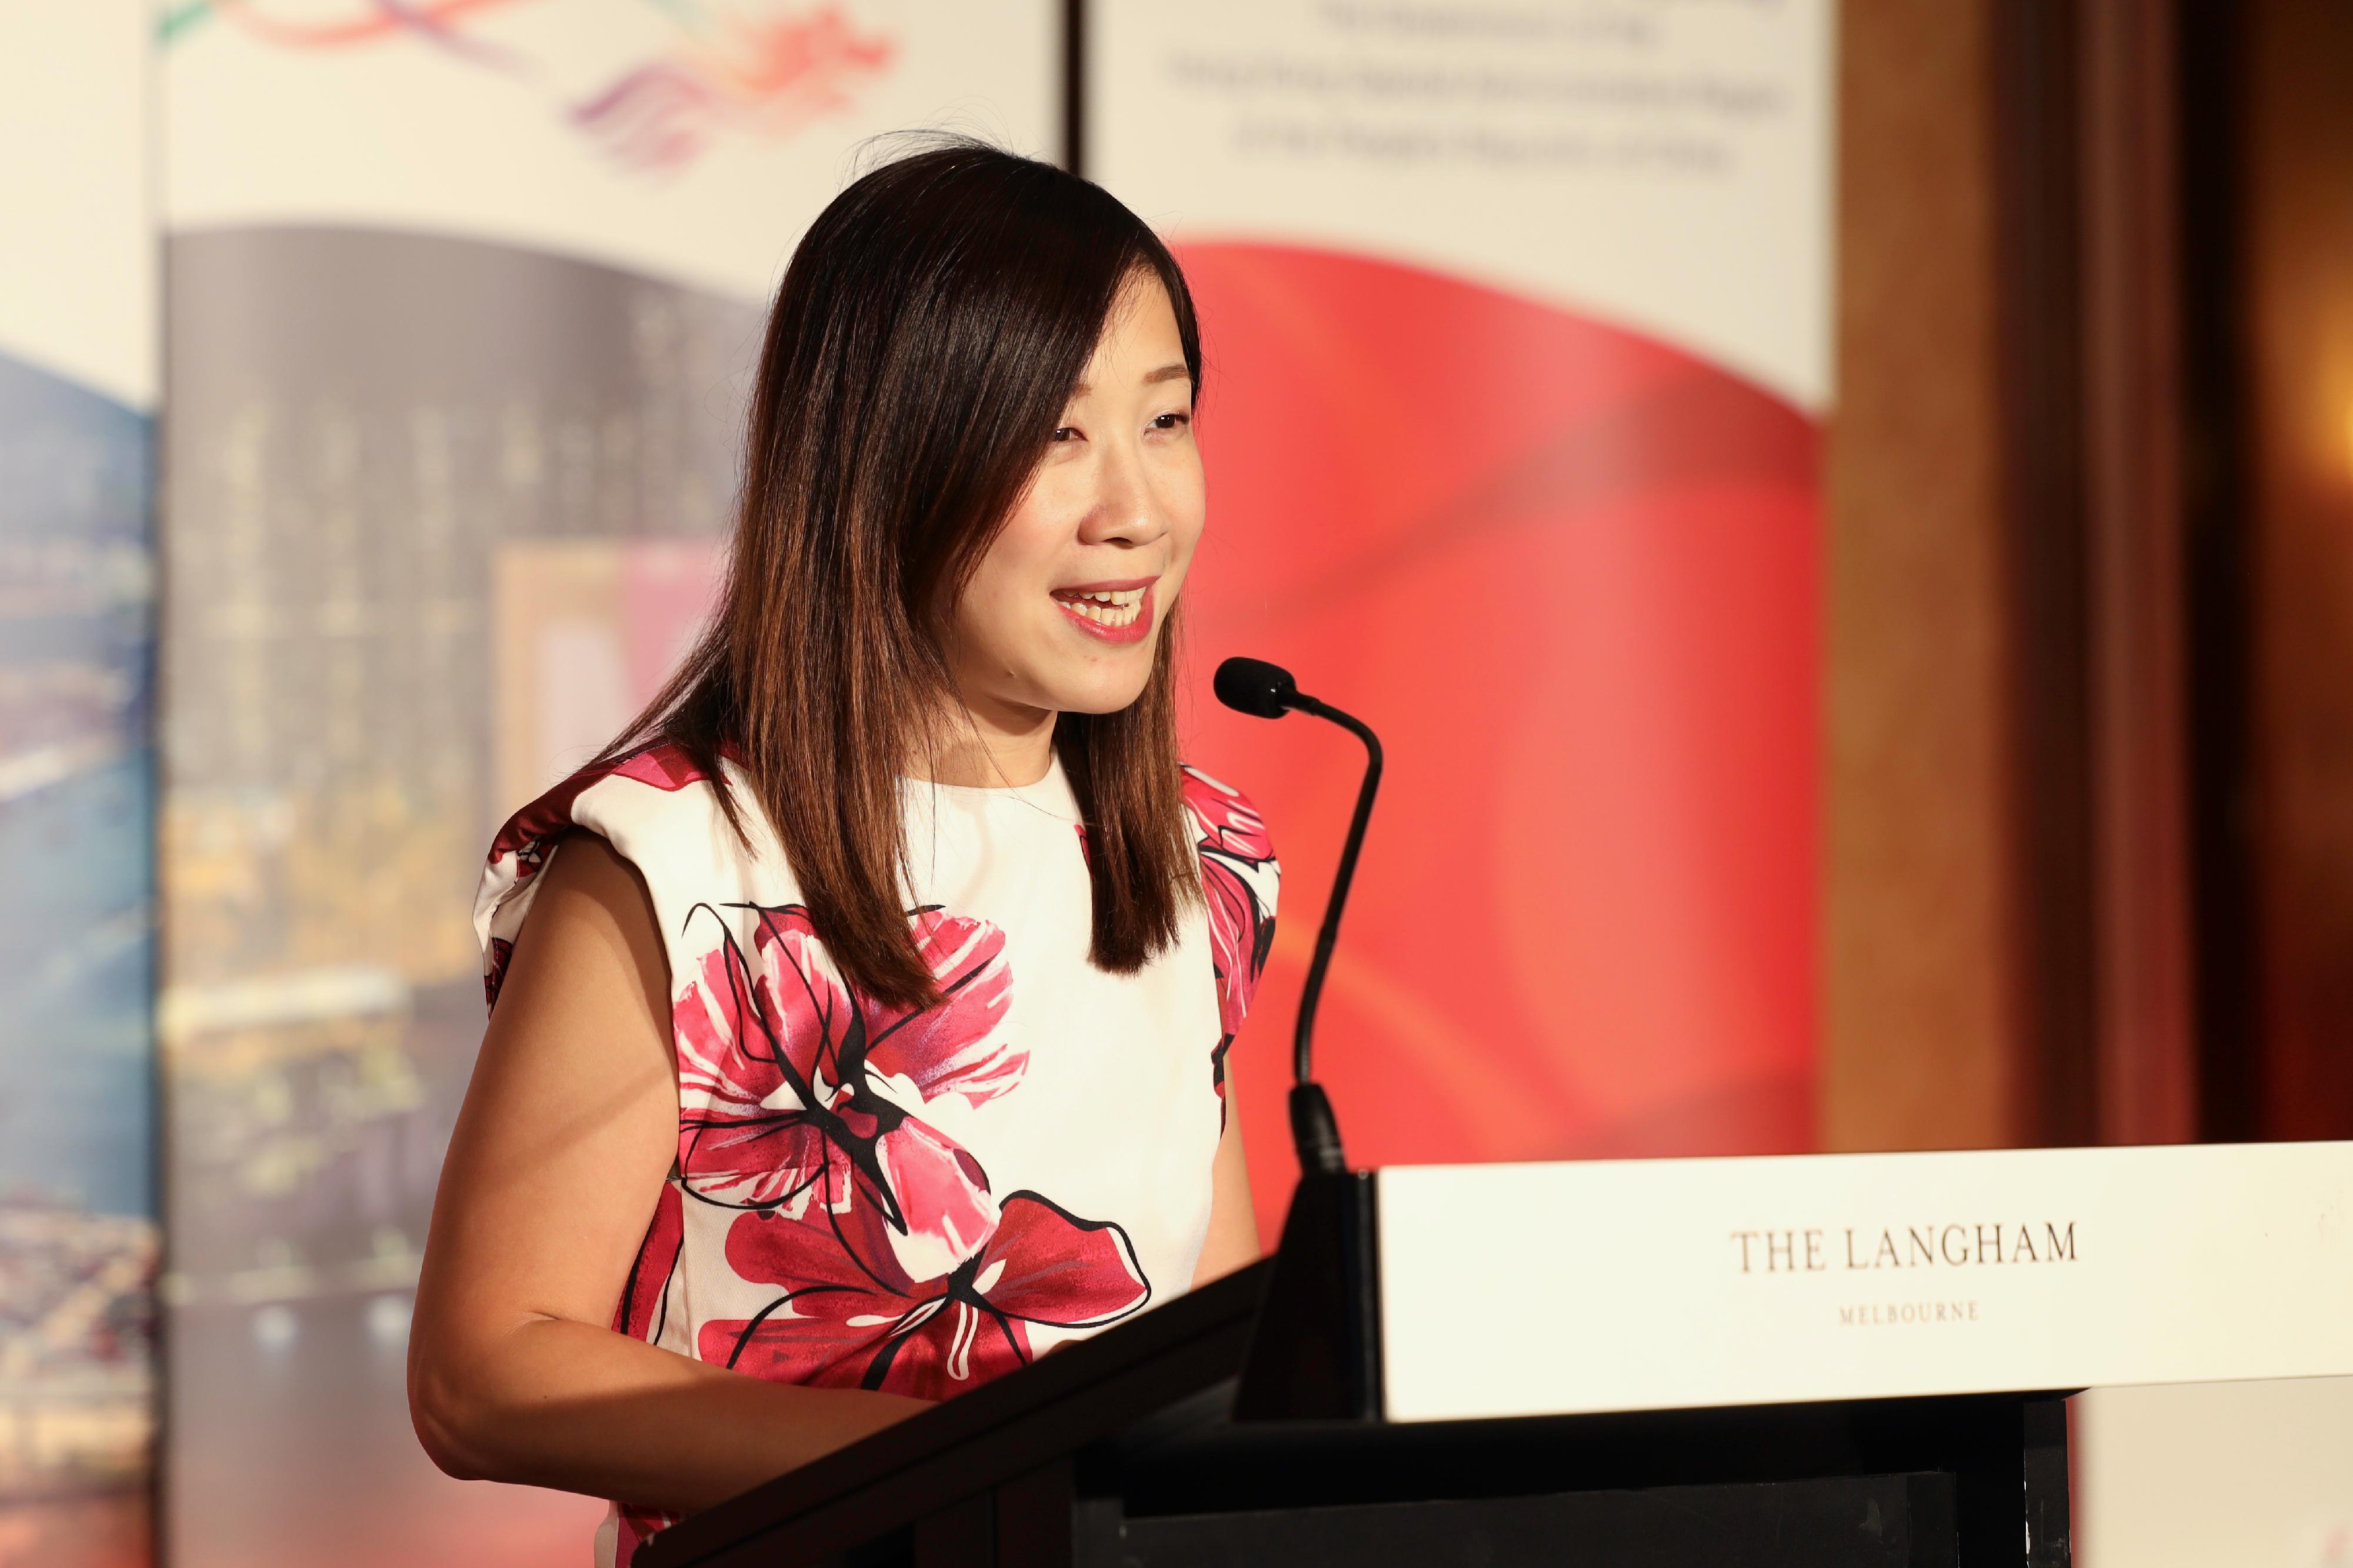 The Director of the Hong Kong Economic and Trade Office, Sydney, Miss Trista Lim, delivers a welcoming speech at the reception held in Melbourne, Australia, yesterday (February 15).